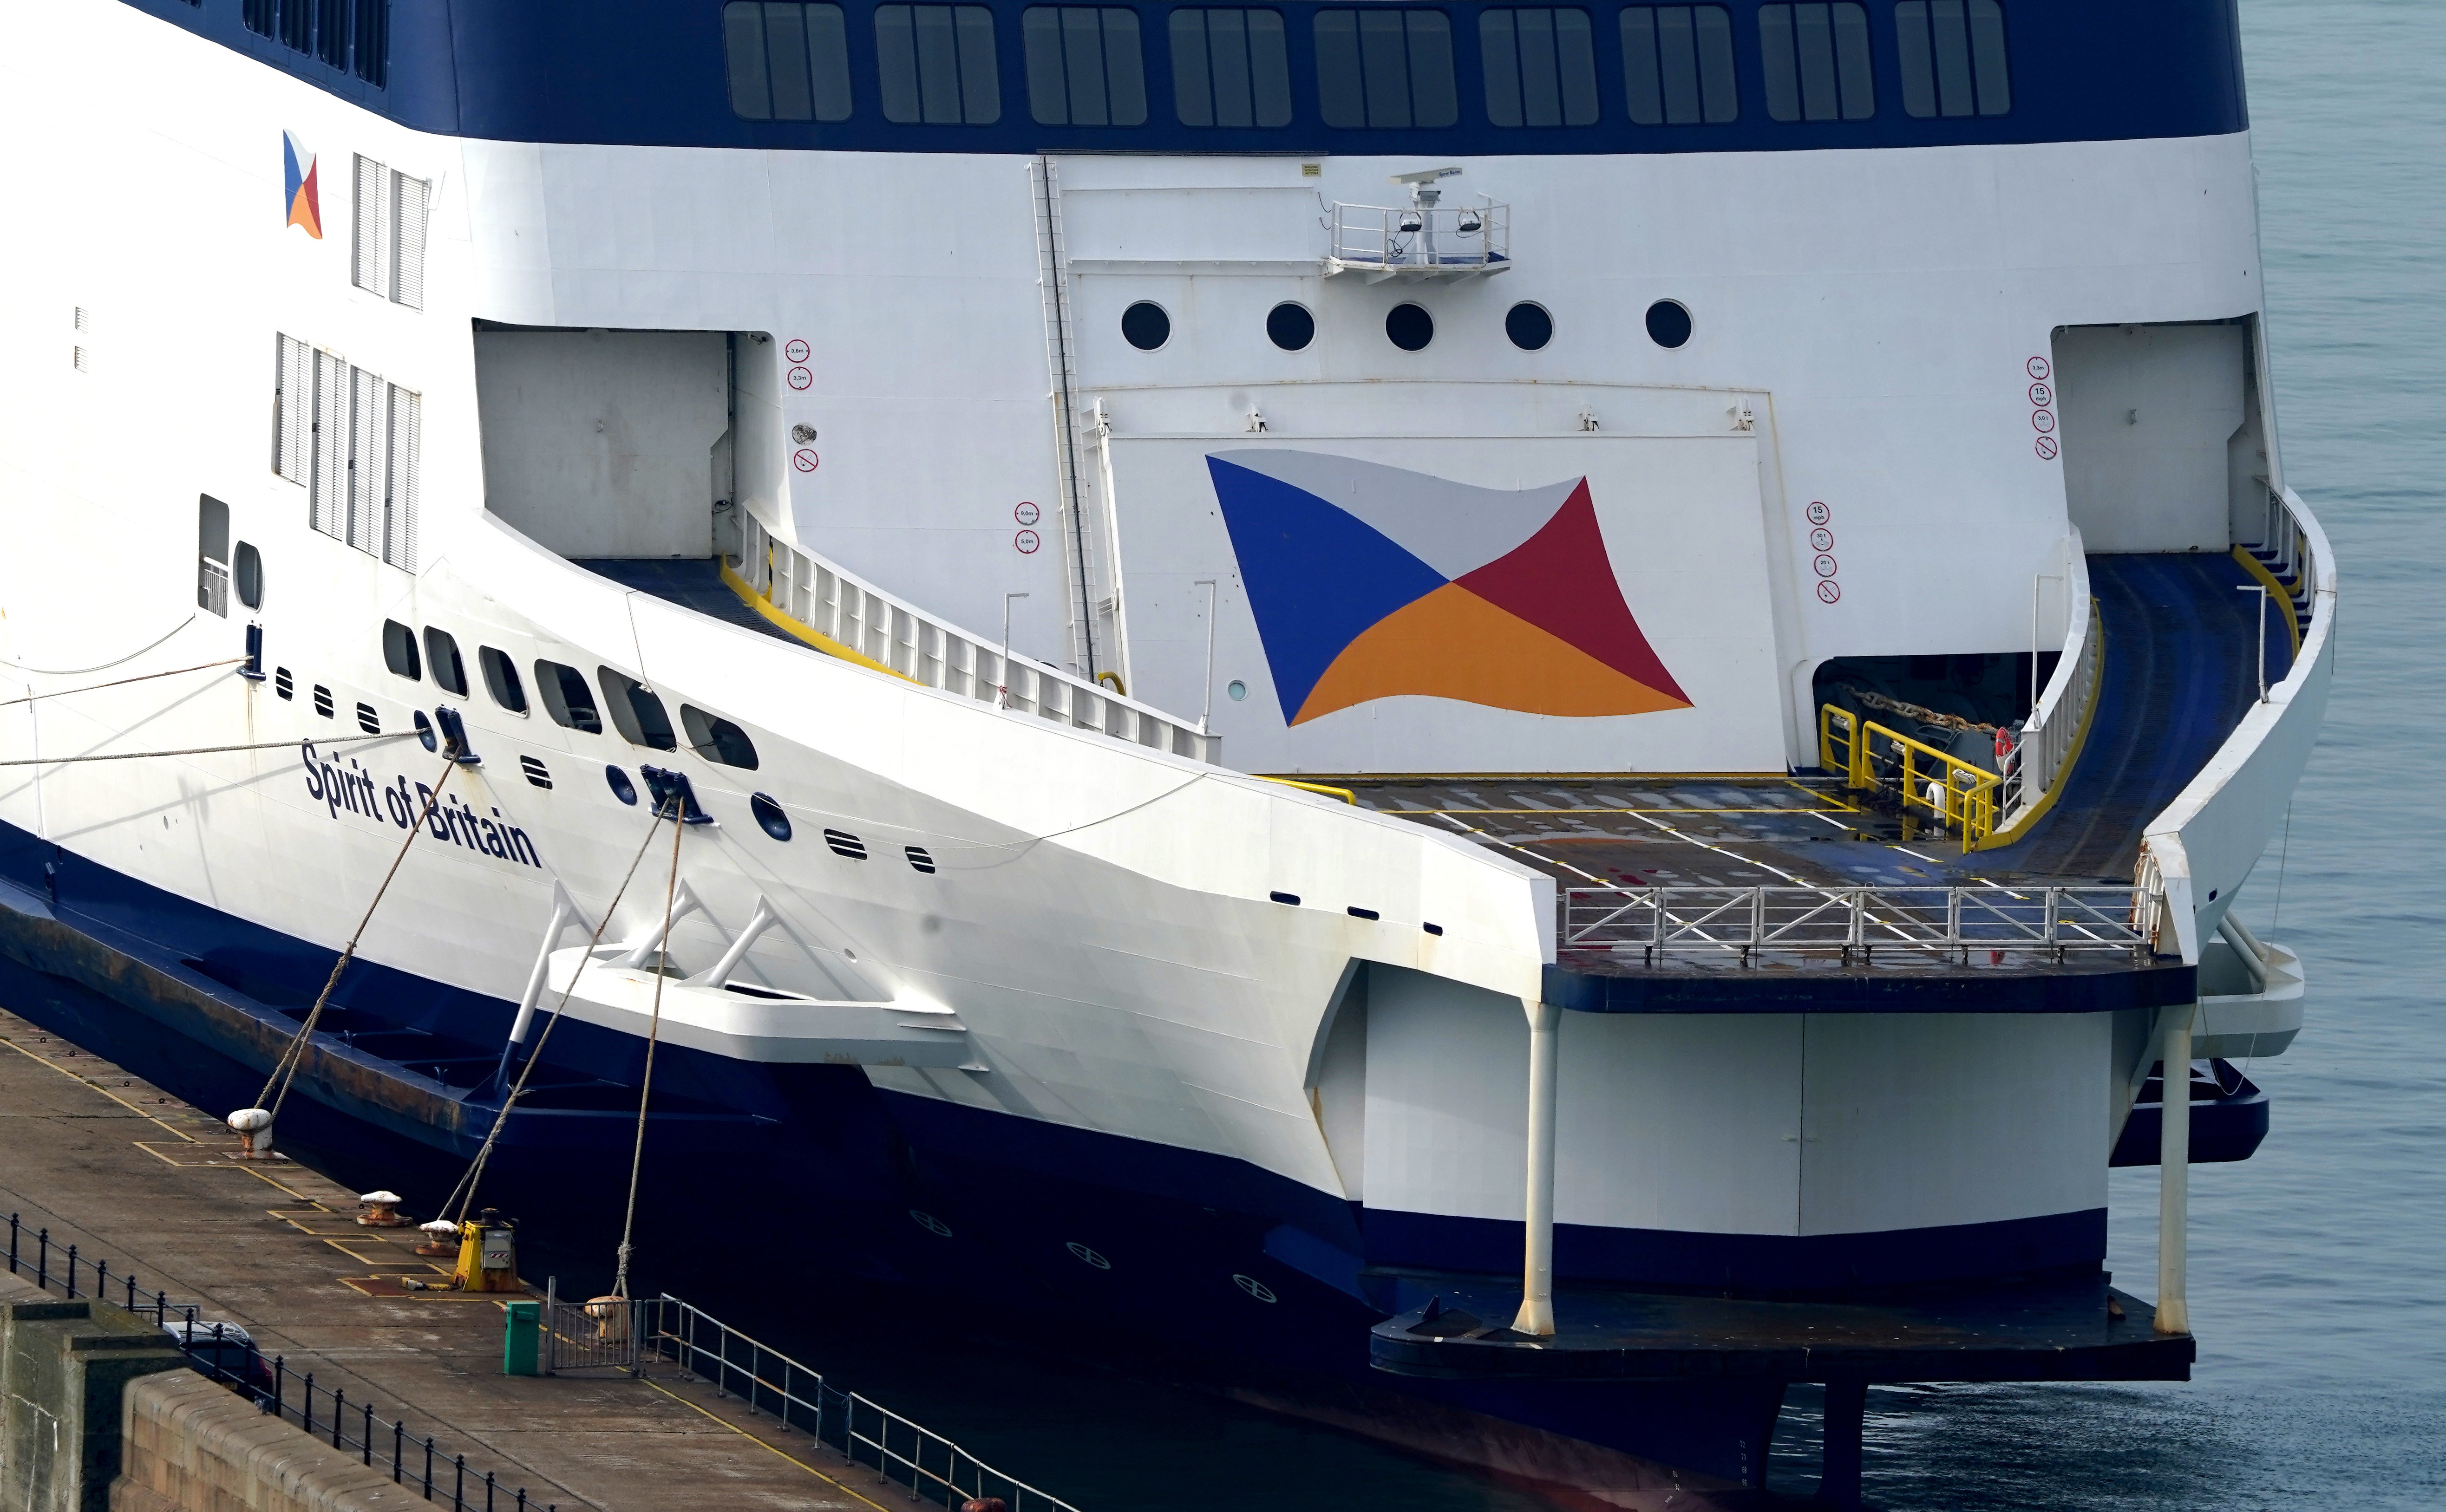 The P&O Ferries vessel Spirit Of Britain remains under detention (Gareth Fuller/PA)